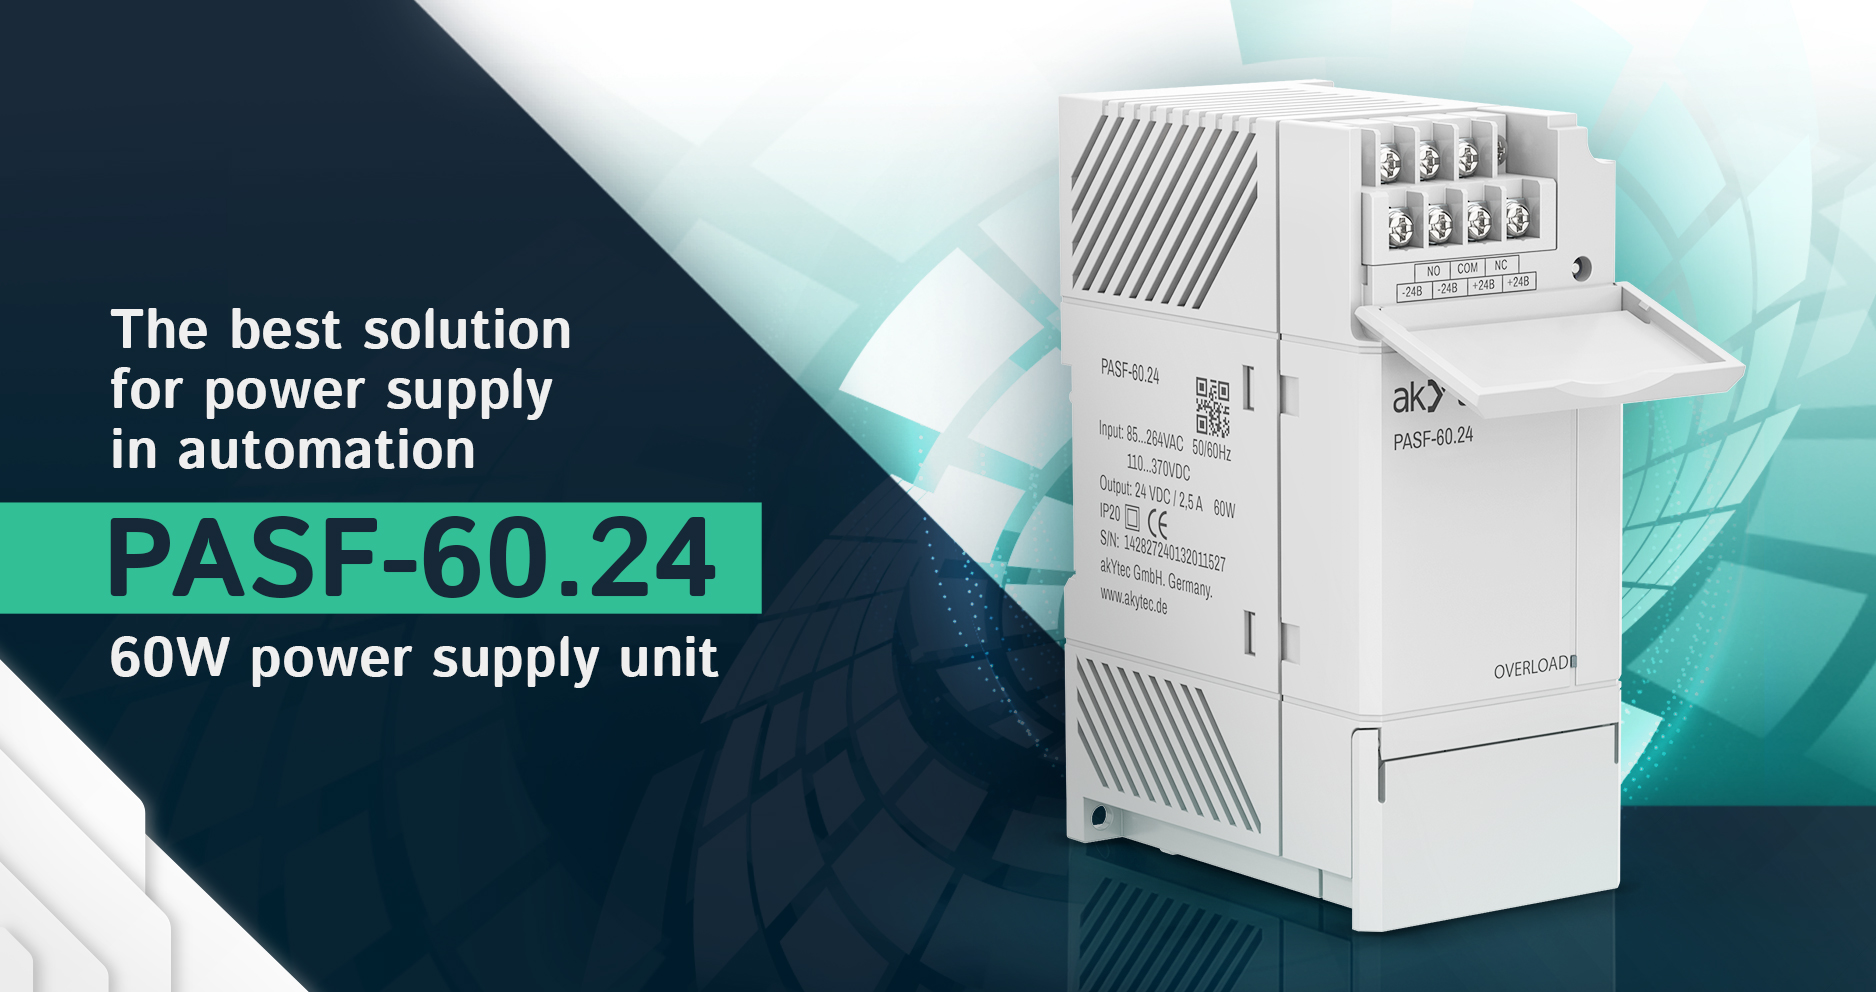 The best solution for power supply in automation